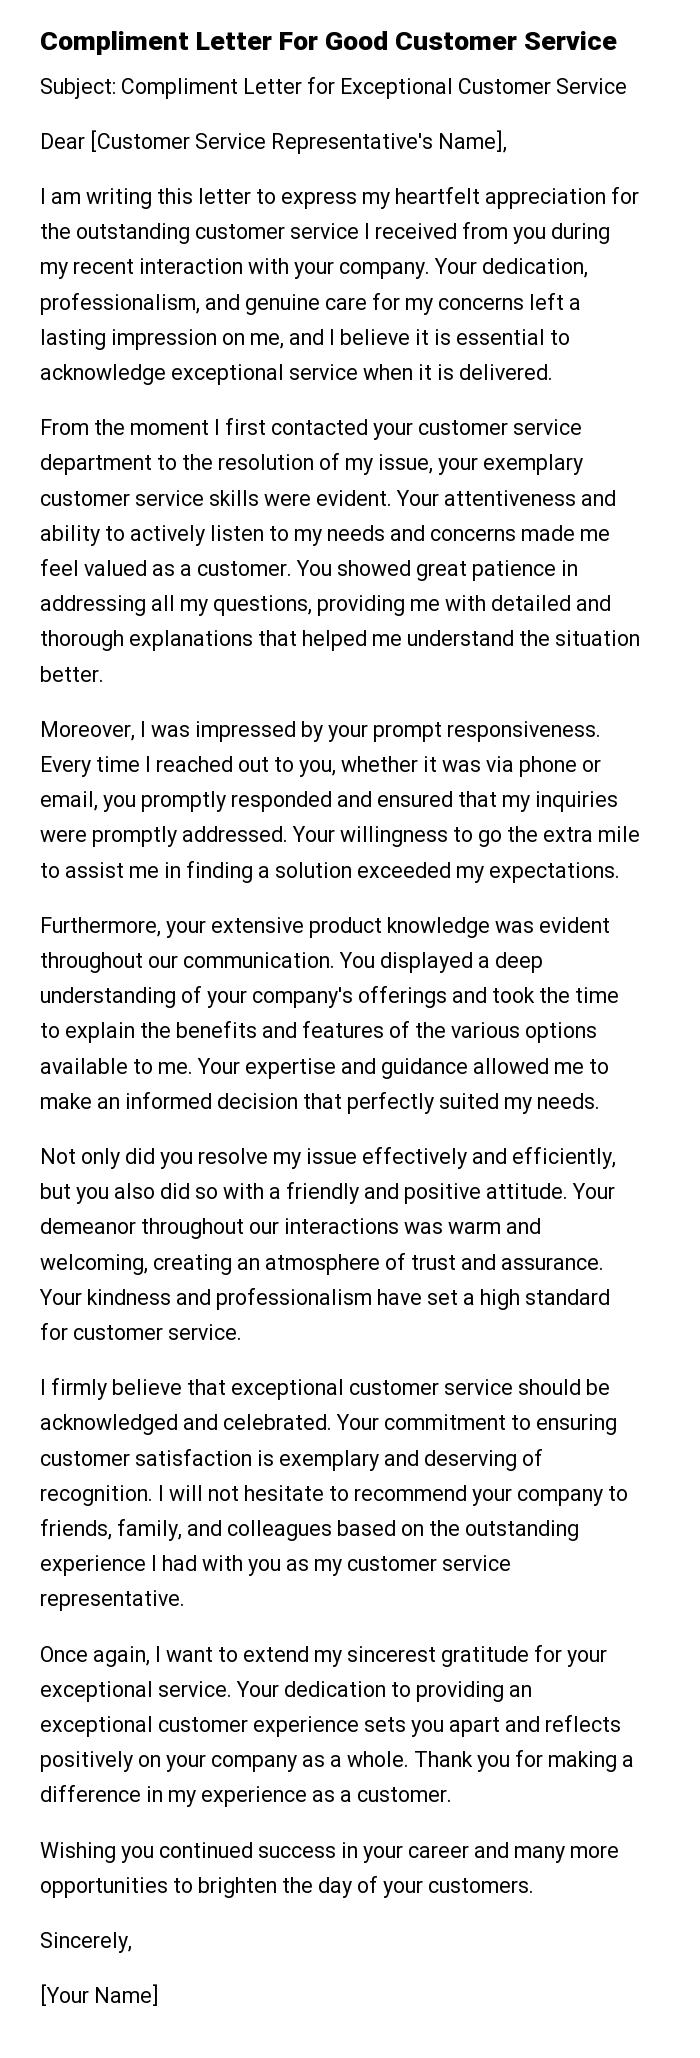 Compliment Letter For Good Customer Service